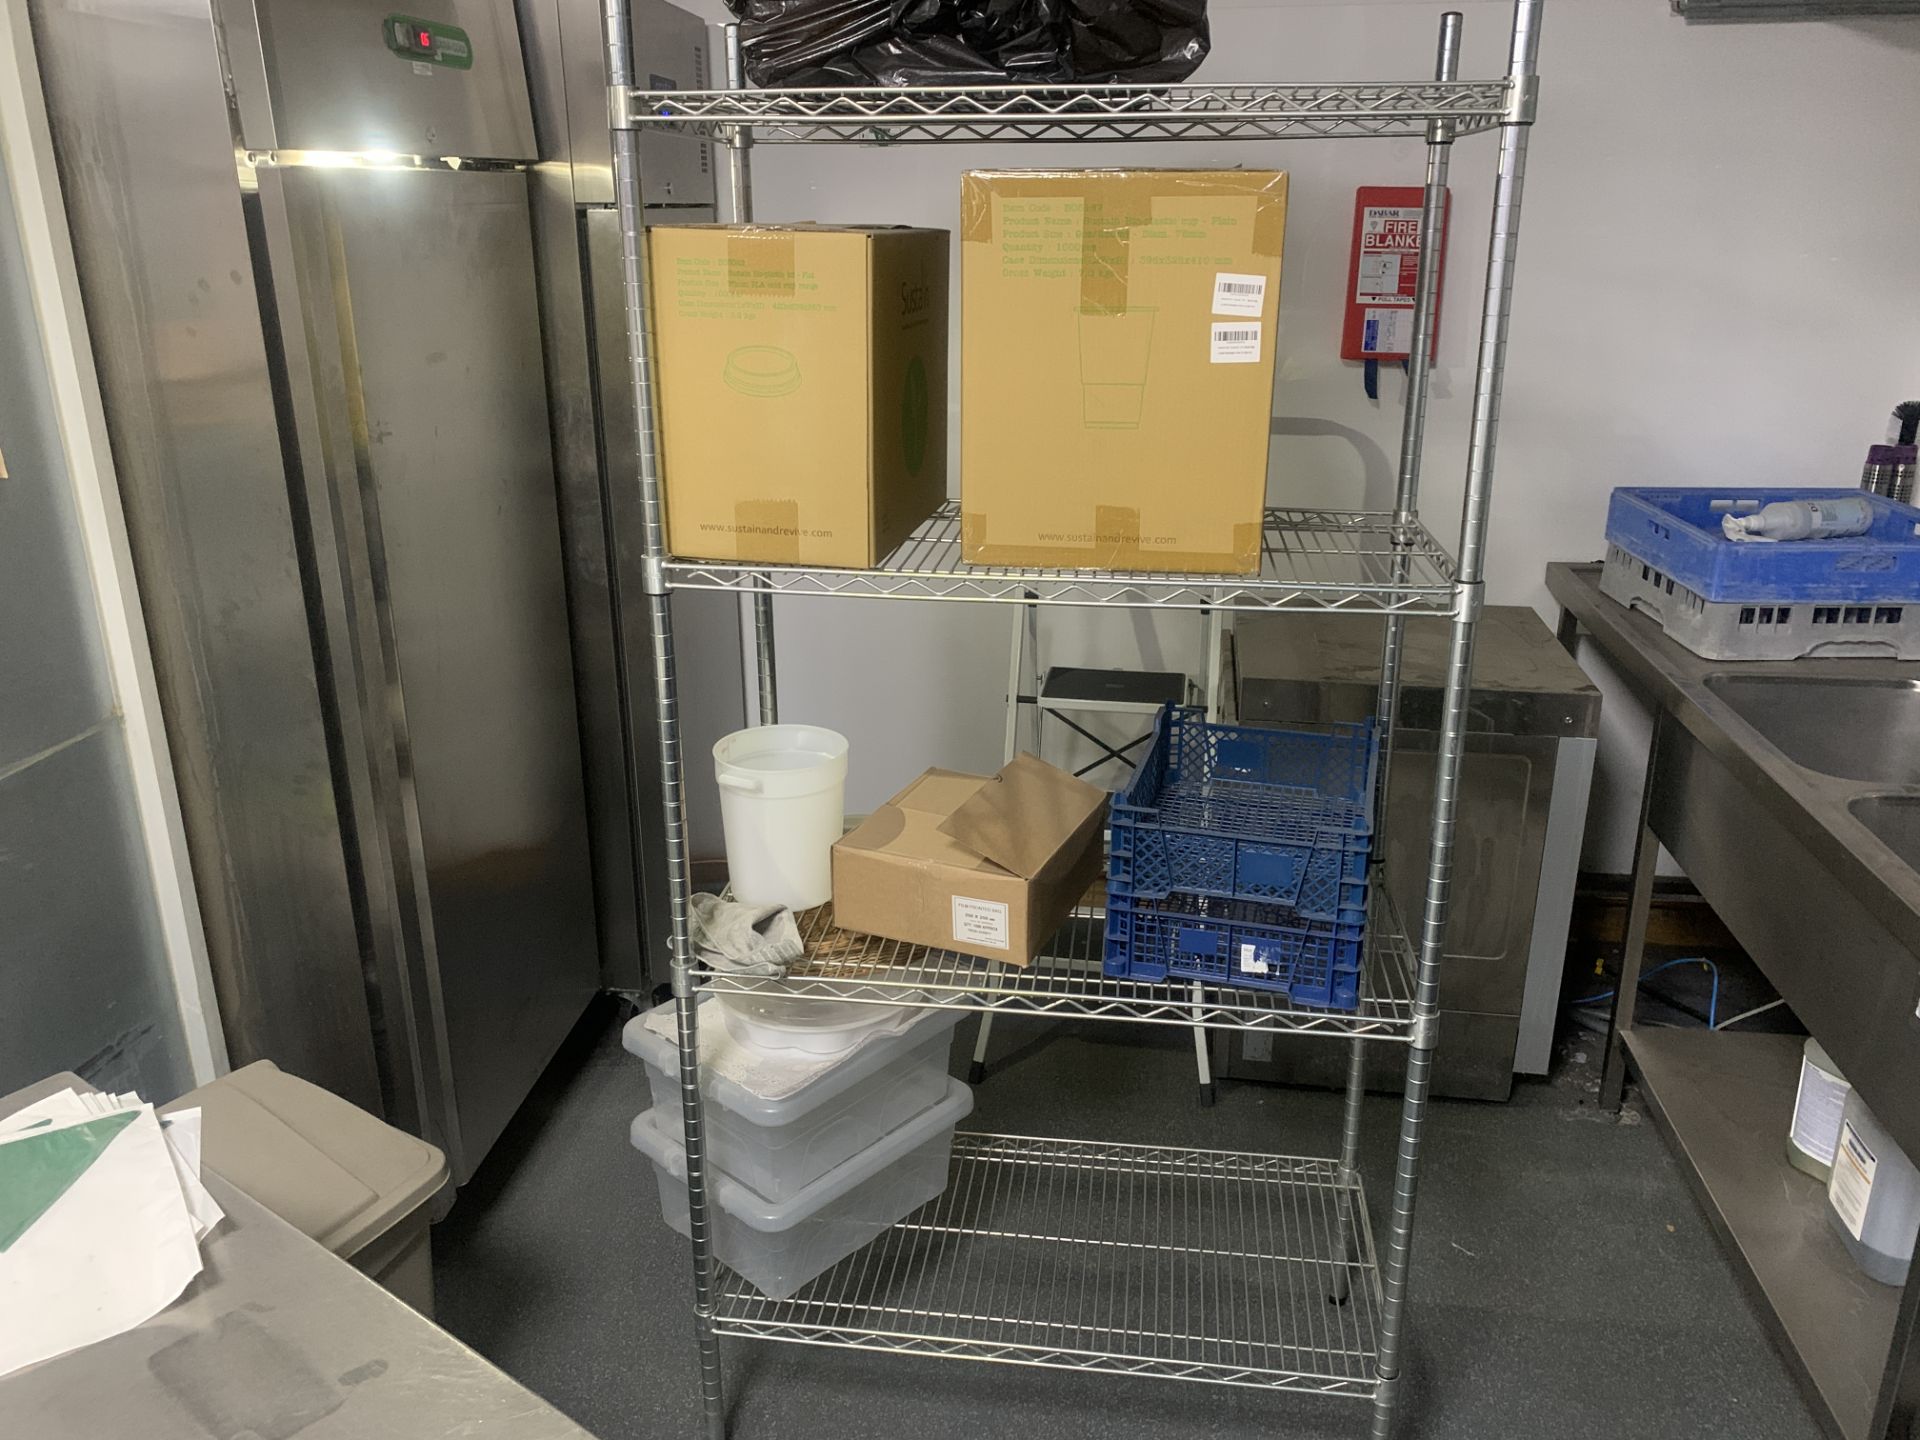 4 TIER STAINLESS STEEL SHELVING UNIT